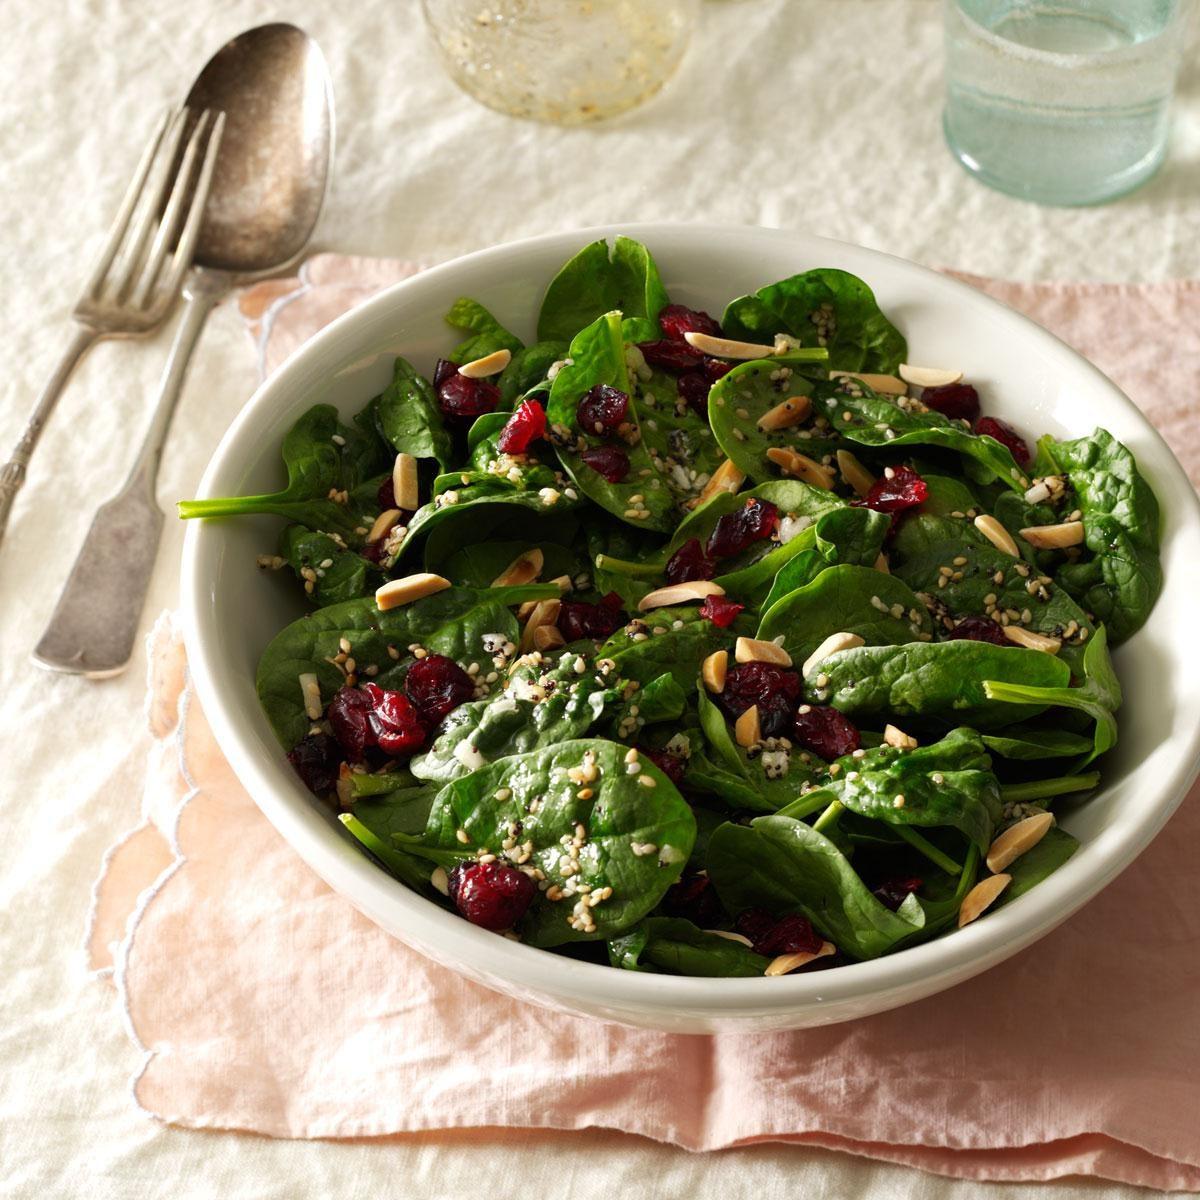 Cranberry-Sesame Spinach Salad Recipe: How to Make It